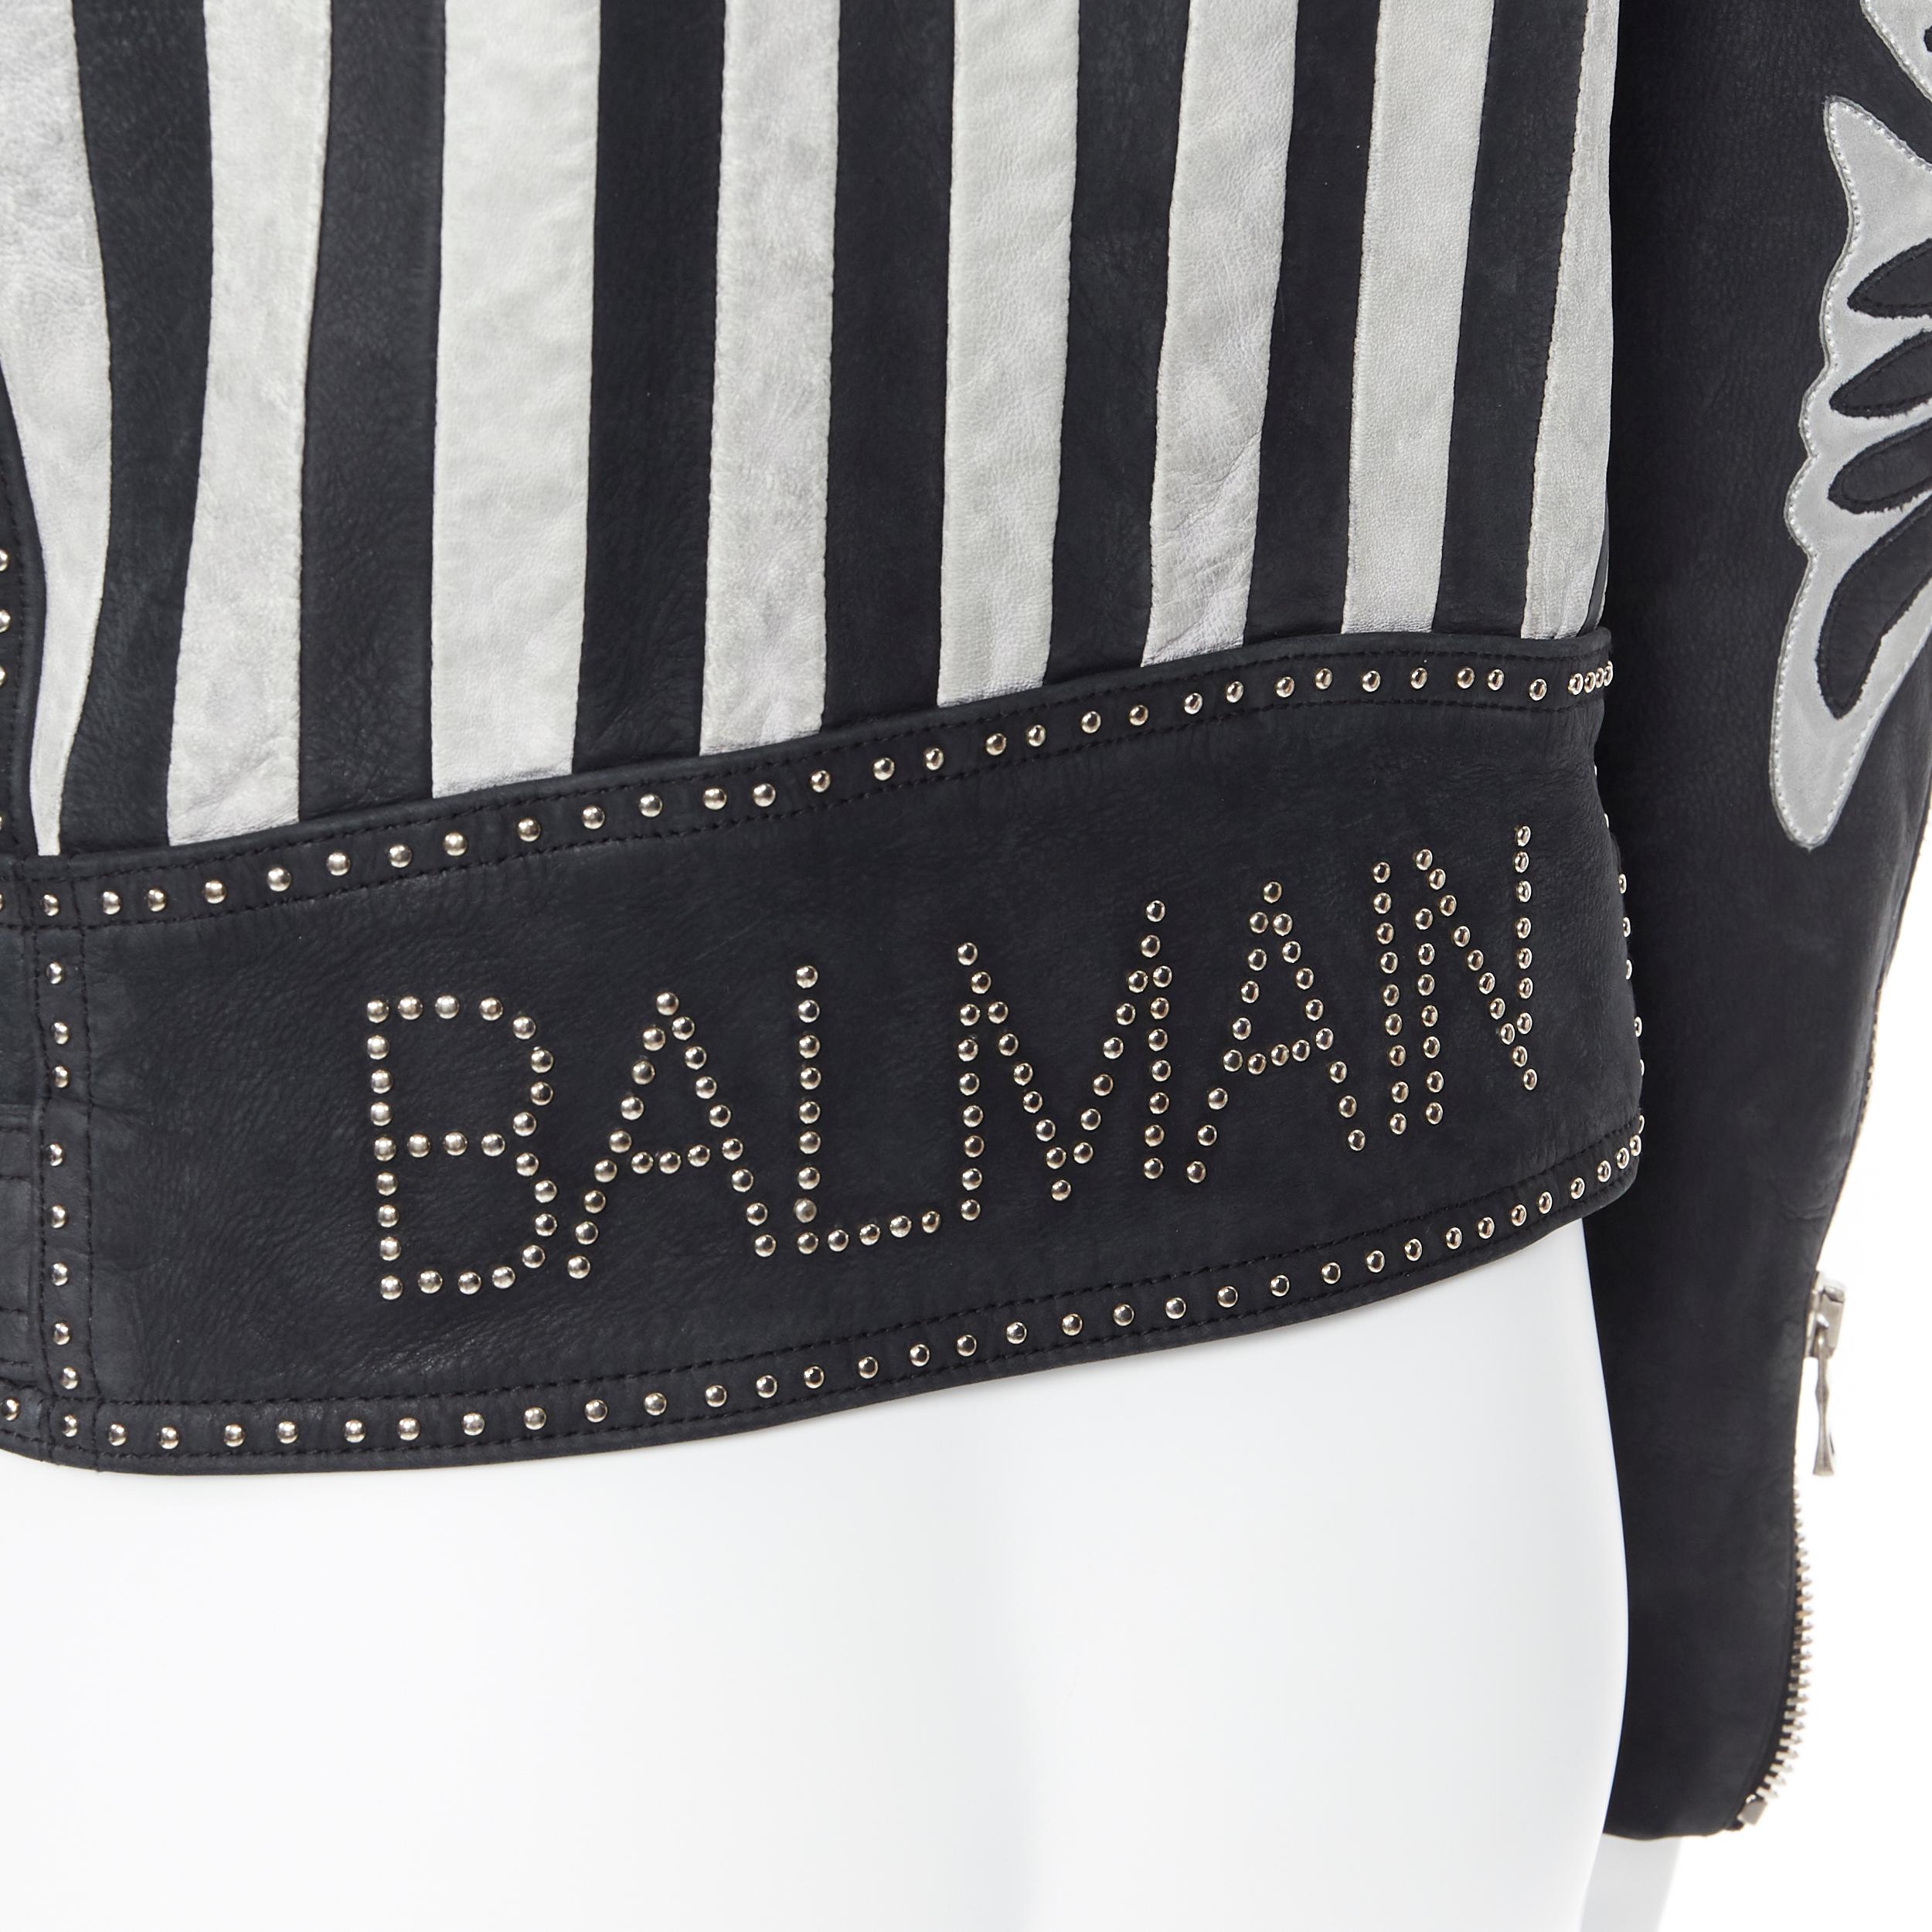 new BALMAIN black distressed leather American Flag studded biker jacket EU48 M
Brand: Balmain
Designer: Olivier Rousteing
Model Name / Style: Leather biker
Material: Leather
Color: Black
Pattern: Abstract
Closure: Zip
Extra Detail: BALMAIN style